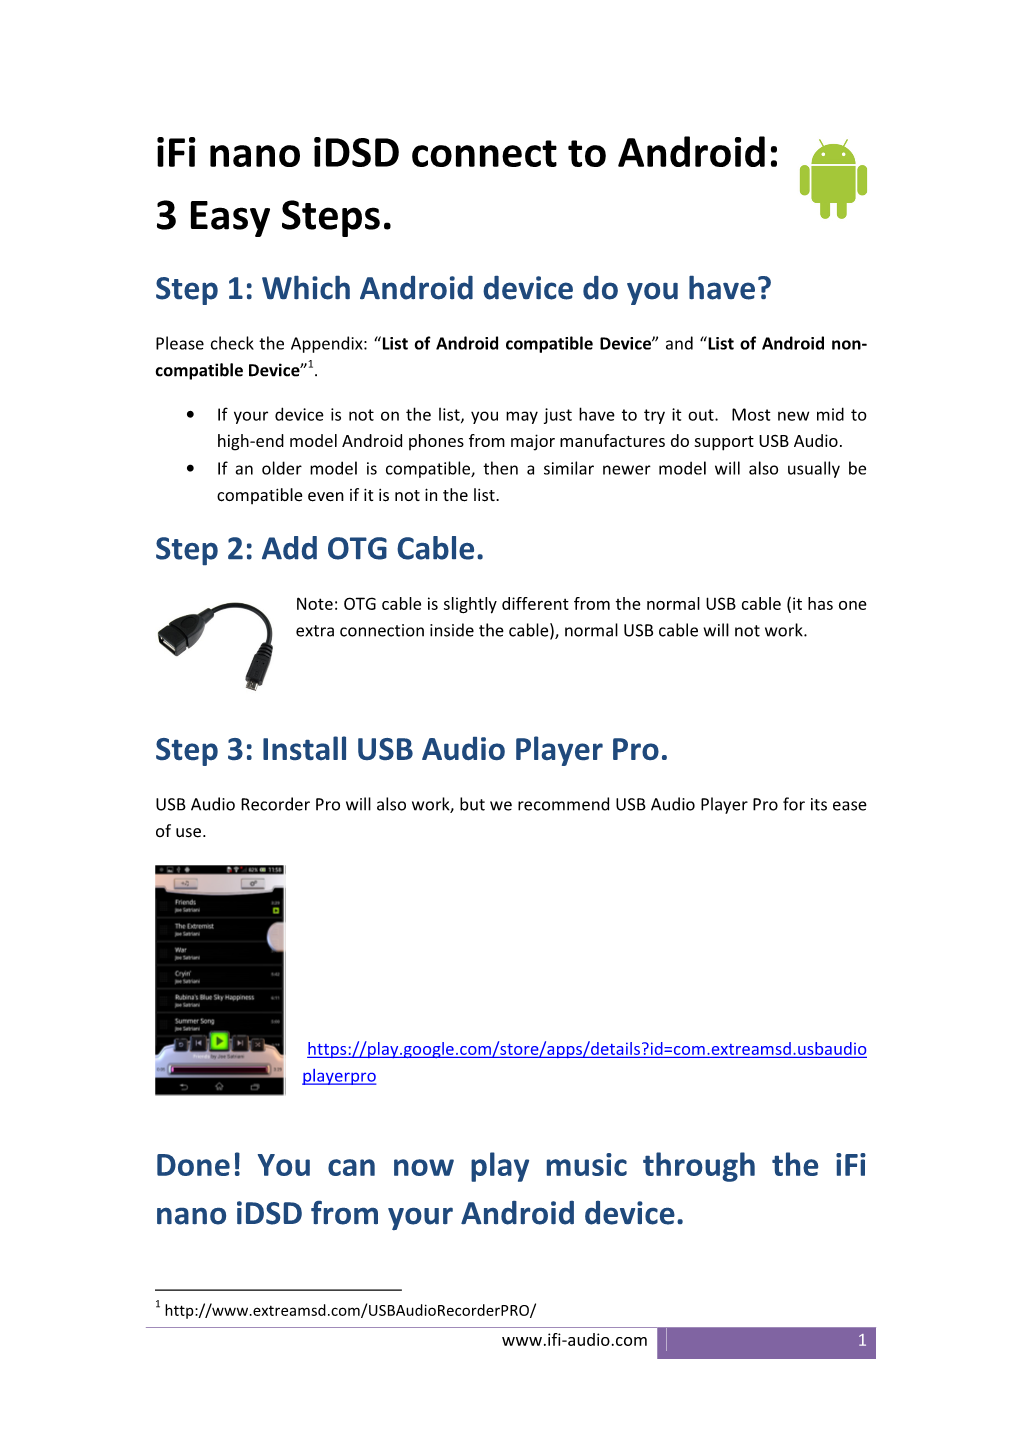 Ifi Nano Idsd Connect to Android: 3 Easy Steps. Step 1: Which Android Device Do You Have?